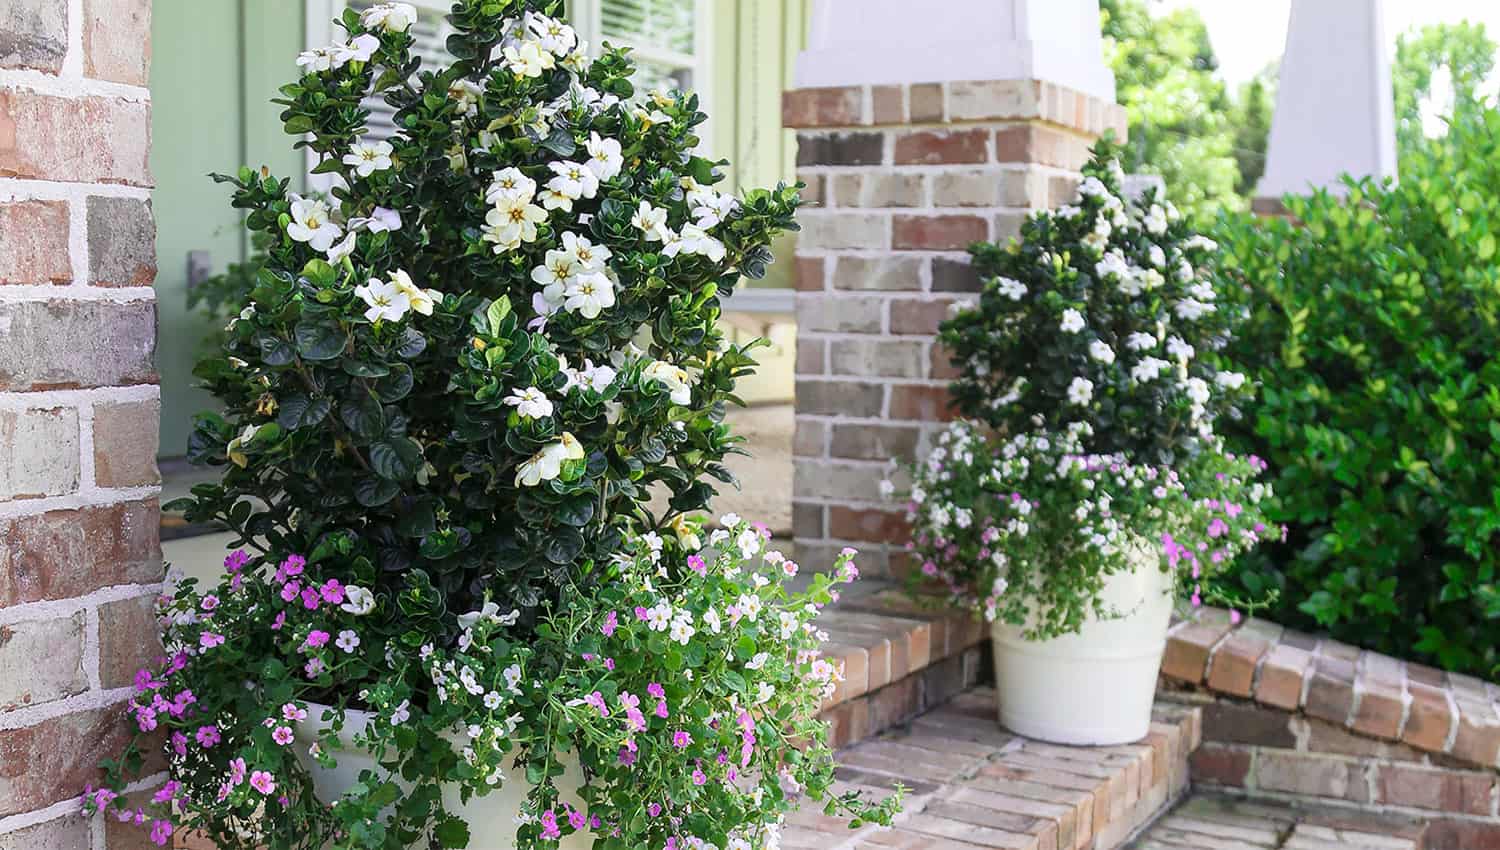 Brick patio with white columns and mixed white containers of Diamond Spire Gardenia and trailing Angelonia.